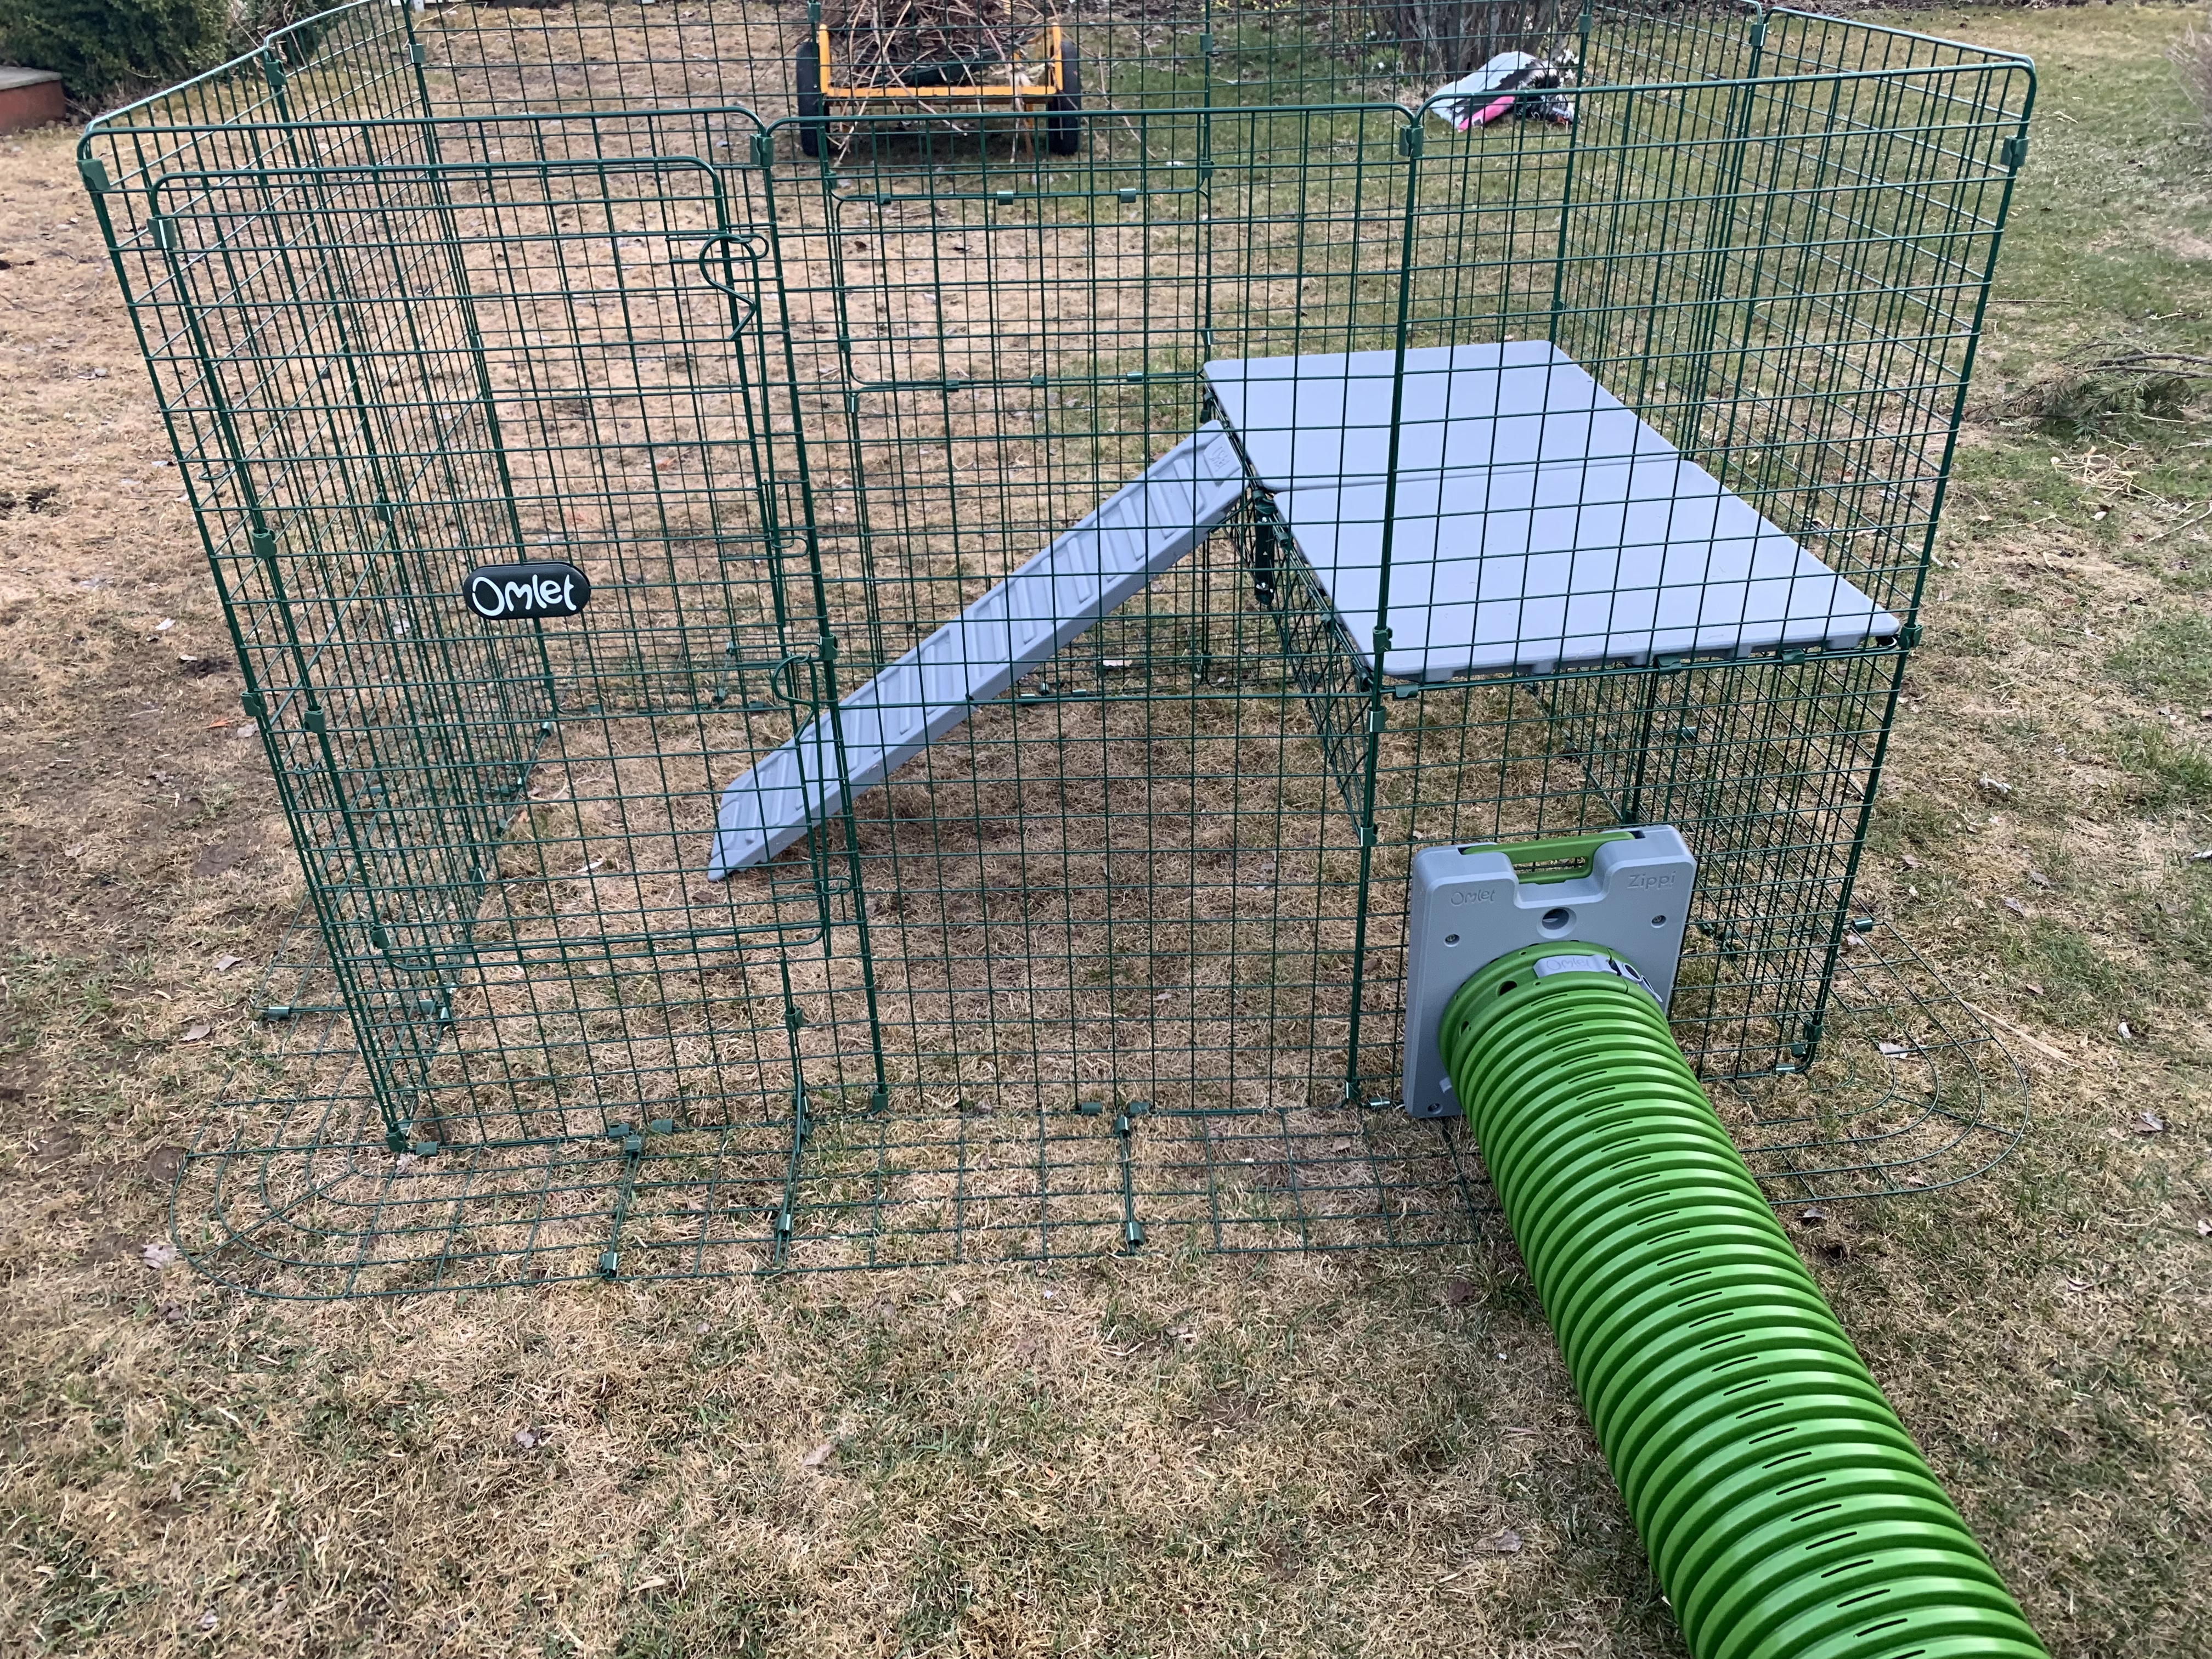 A tunnel connected to an outdoor enclosure